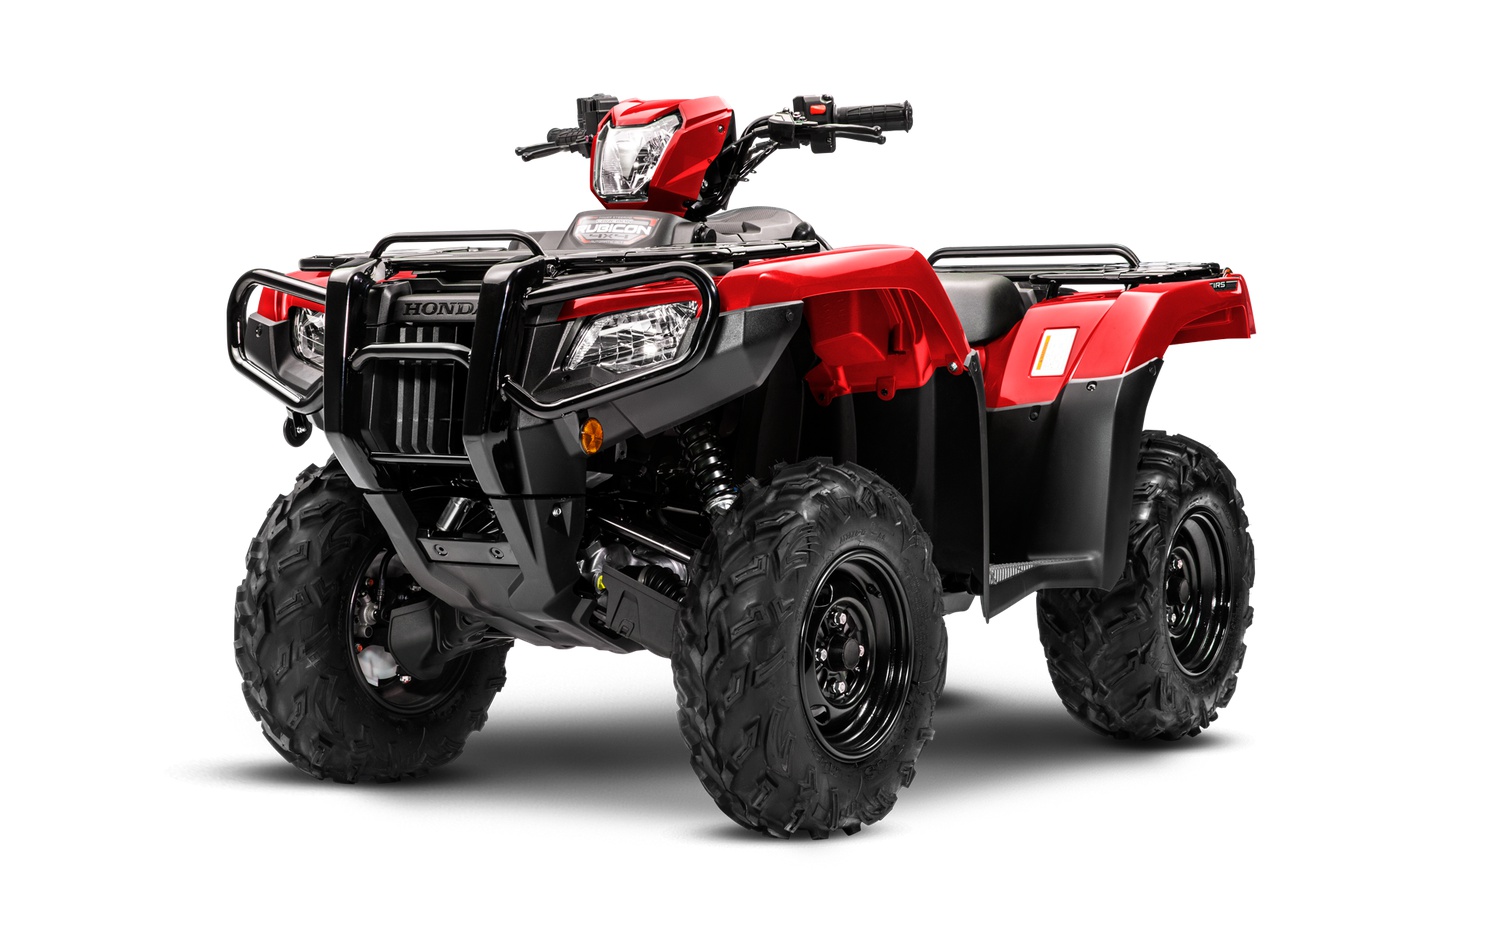 2021 Honda Rubicon 520 DCT IRS EPS Patriot Red